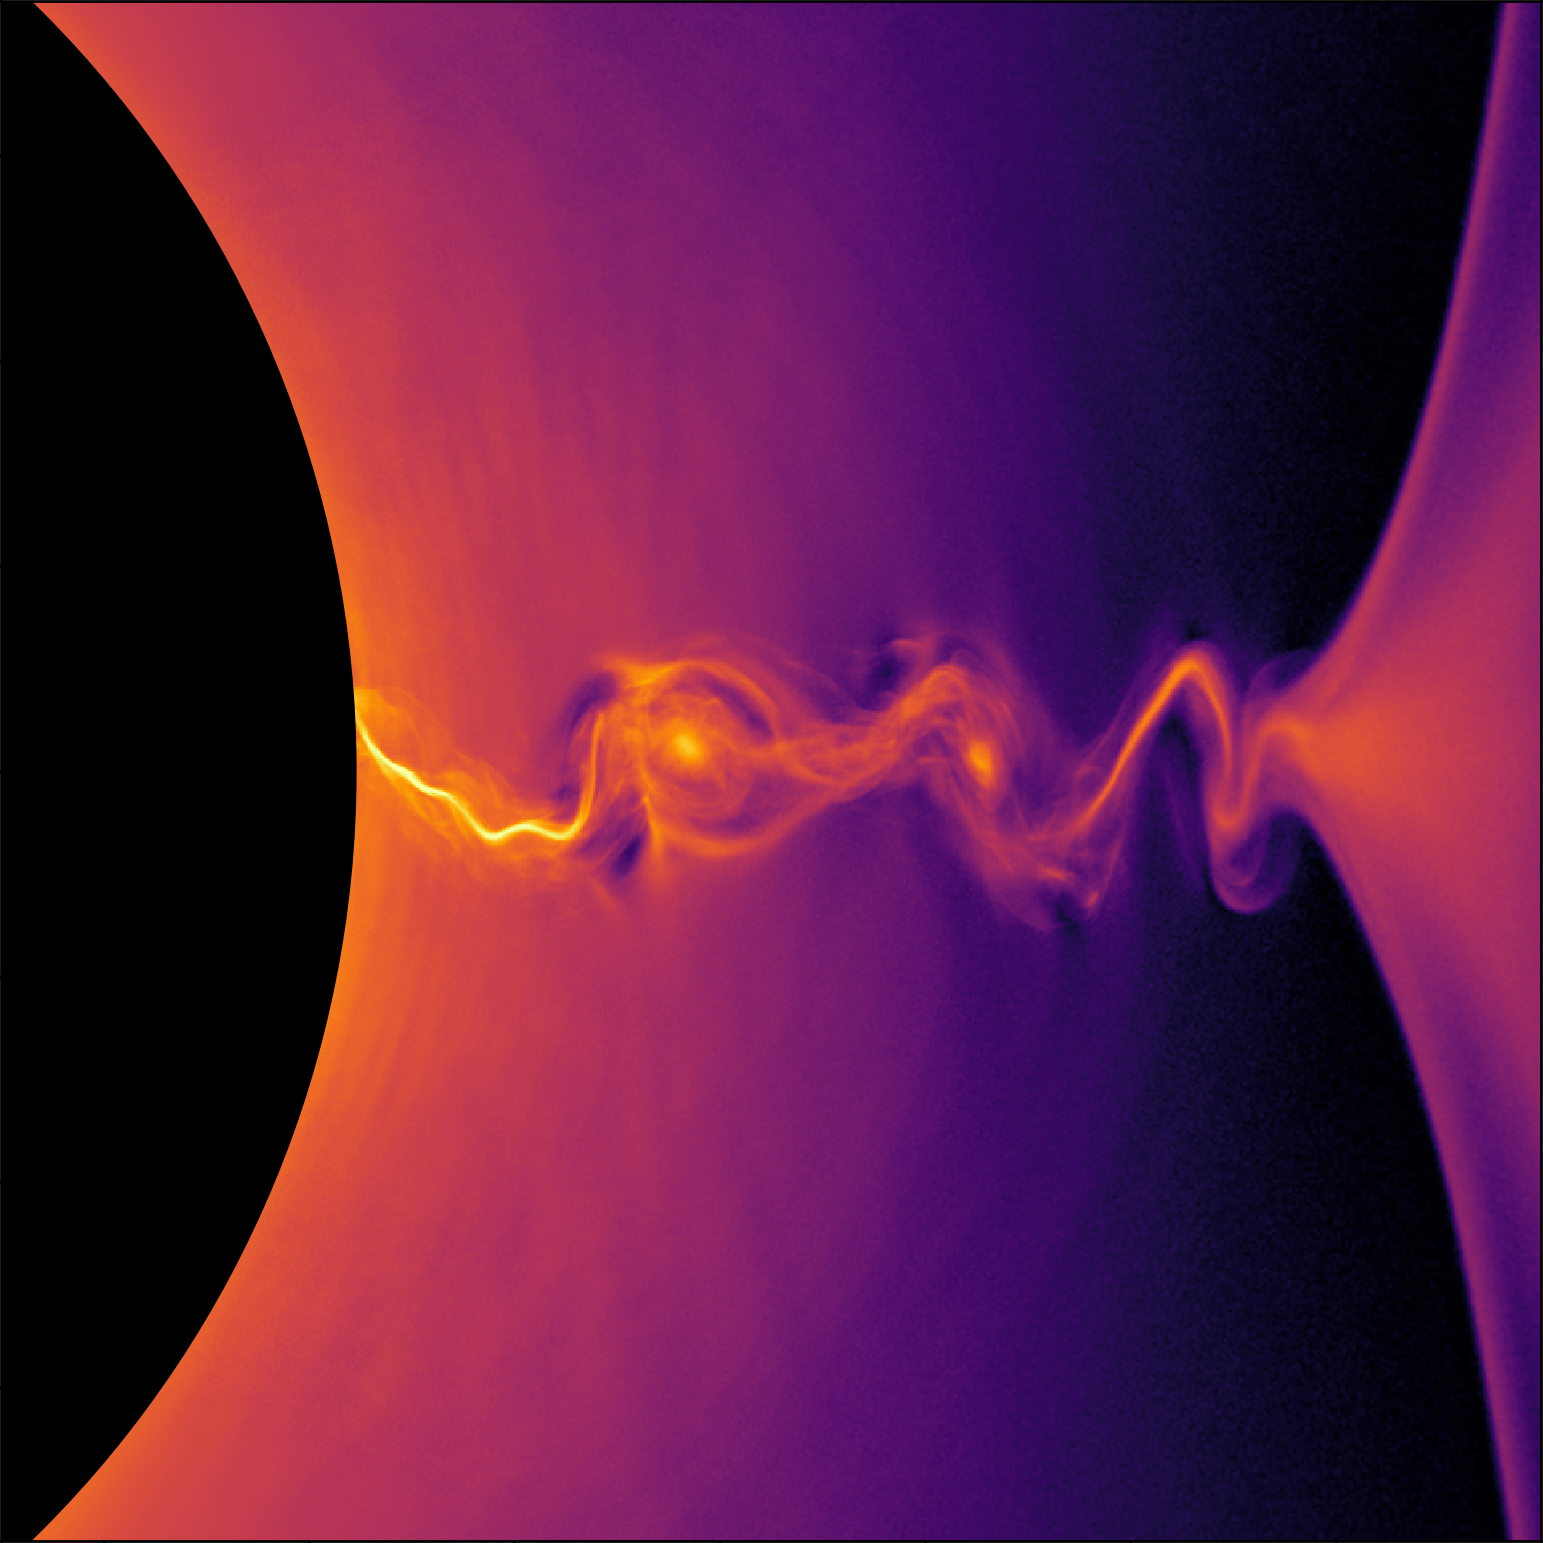 Image - This visualization of a general-relativistic collisionless plasma simulation shows the density of positrons near the event horizon of a rotating black hole. Plasma instabilities produce island-like structures in the region of intense electric current. (Credit: Kyle Parfrey et al./Berkeley Lab)